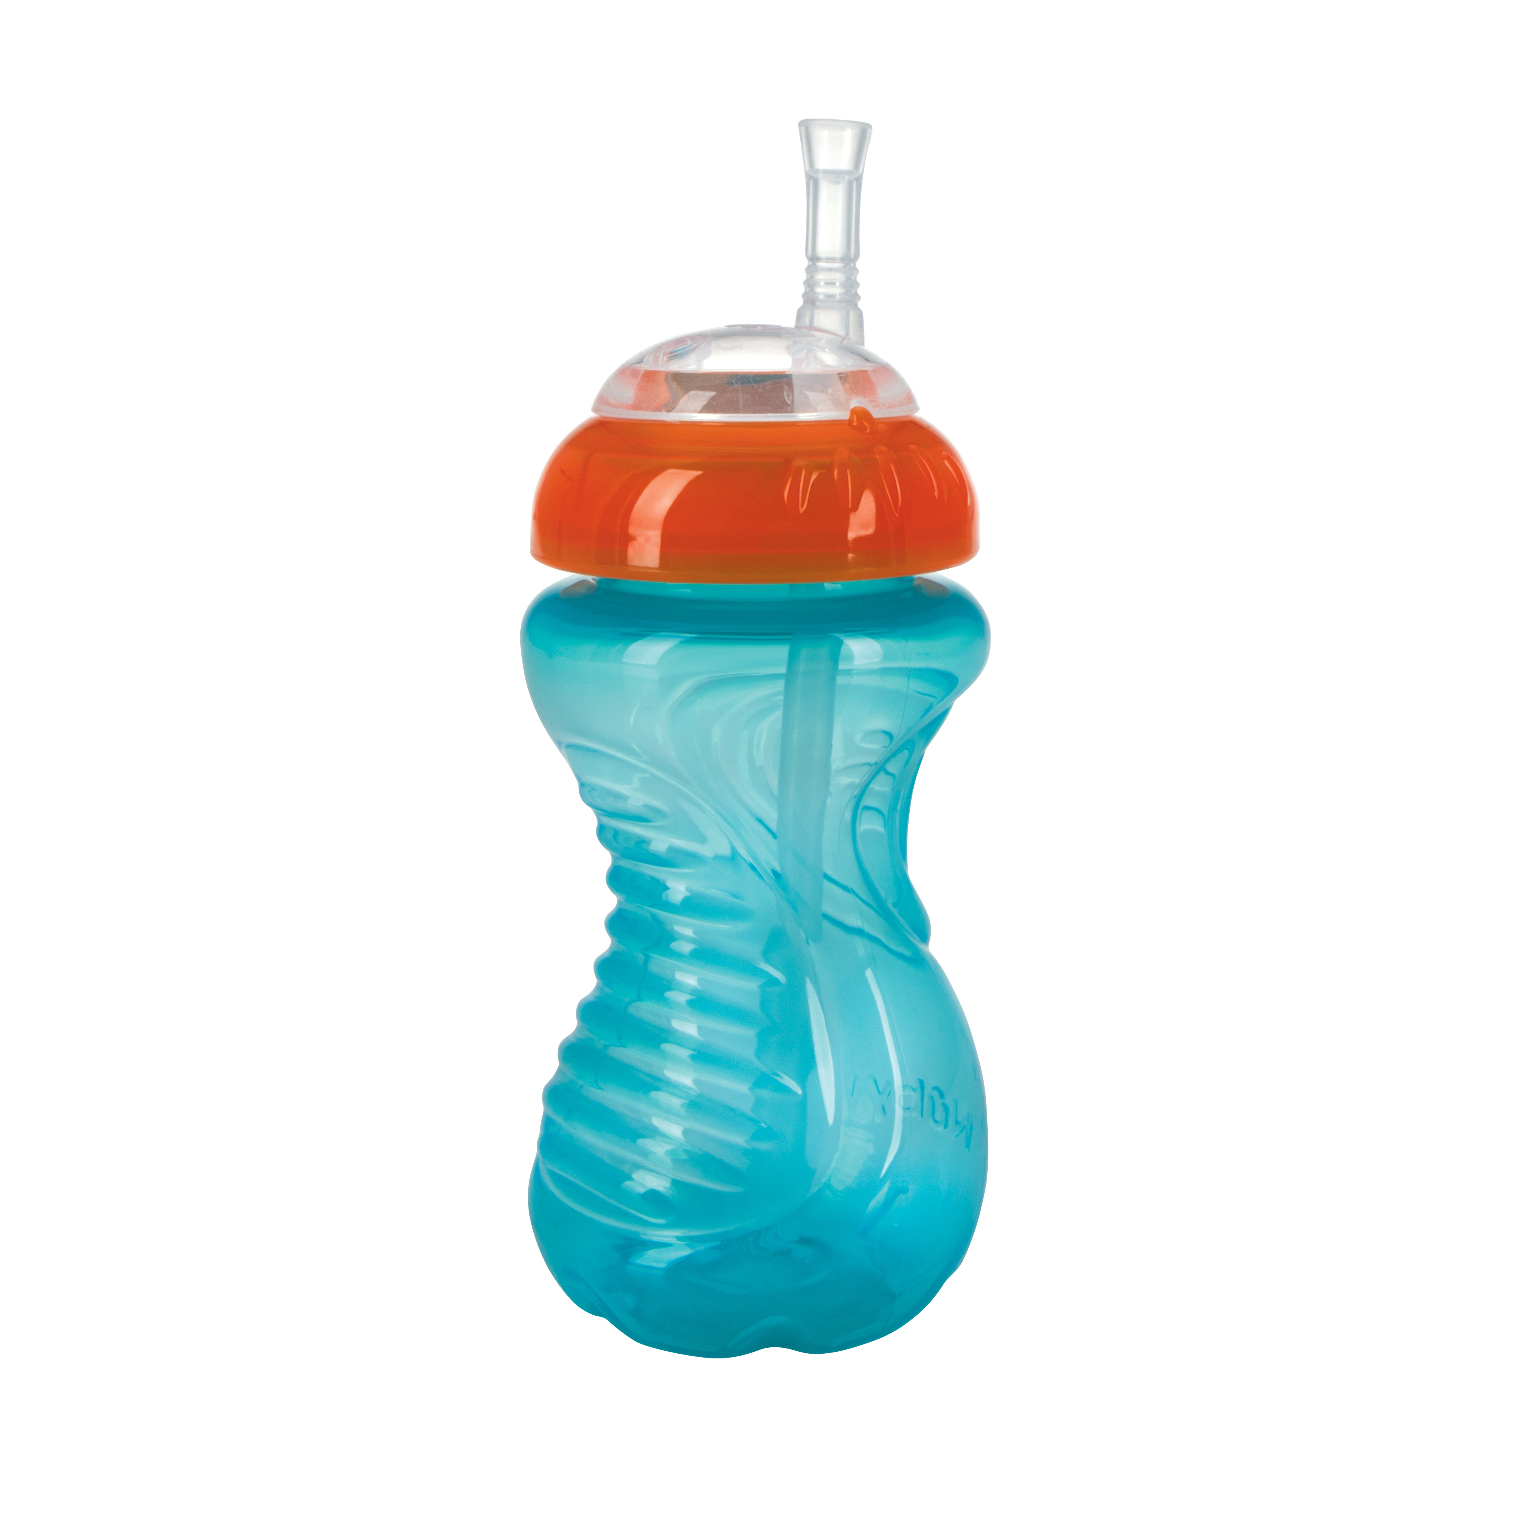 Nuby Twist N' Sip No Spill Straw Cup - Colors Vary - Assorted